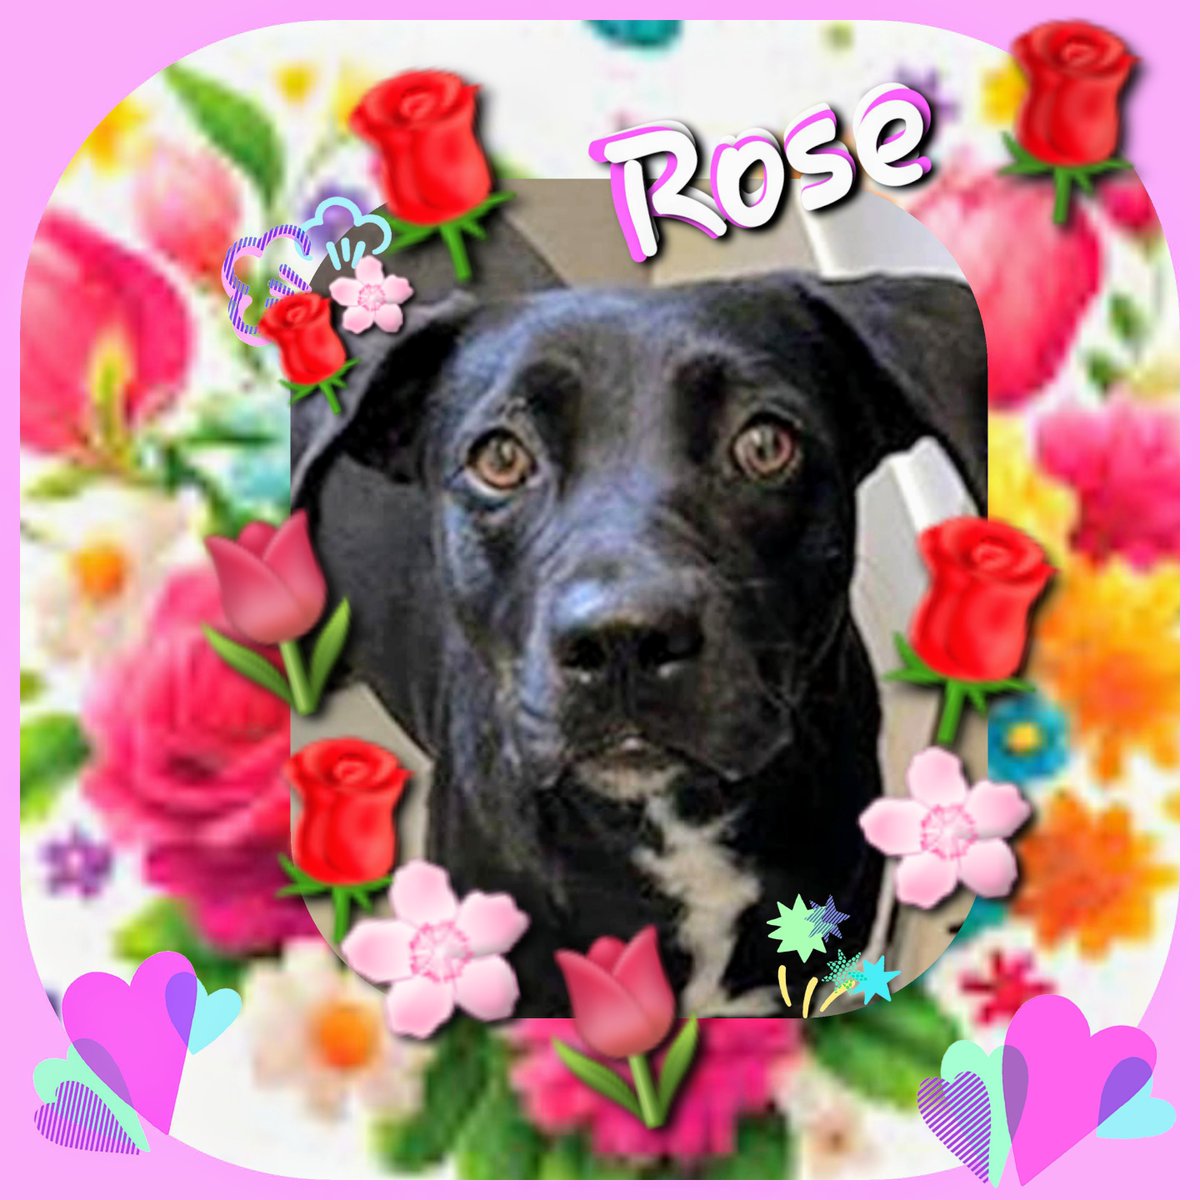 ⏰️🚨 ROSE 🌹 #A366978 1 yo 44 pound Lab Mix, SWEET🥰 friendly SHY and already DOOMED to DIE 5/20! WTH? 😡 Unbelievable, she's only ONE YEAR OLD! 😫🖤 Please HELP! 🙏 Pledge here OR you can FOSTER or ADOPT at CORPUS CHRISTI AC 📧 ccacsrescues@cctexas.com 📞 361-826-4630